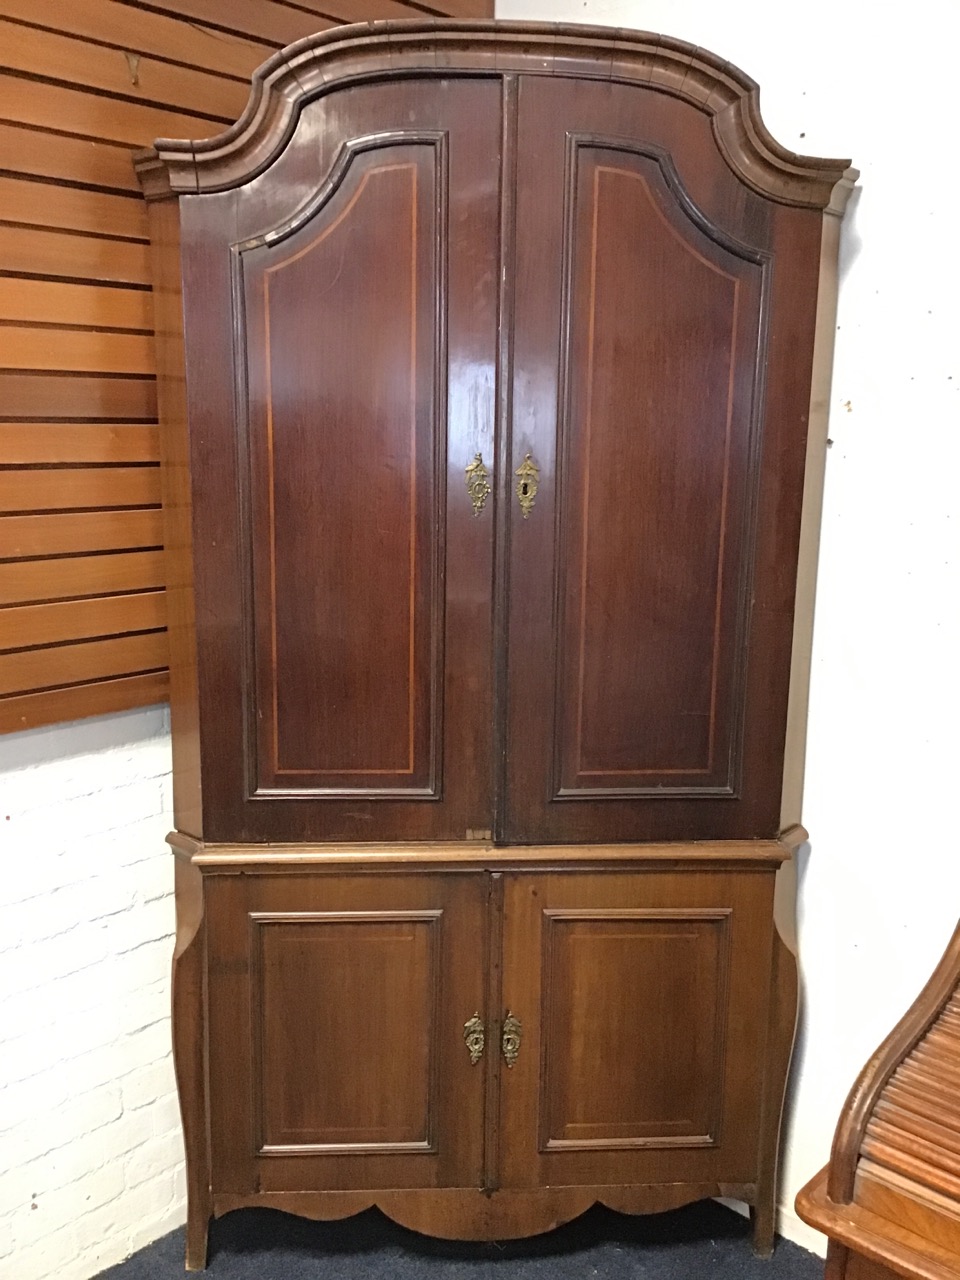 A C18th Dutch corner cabinet with shaped arched cornice above a pair of panelled doors with - Image 3 of 3